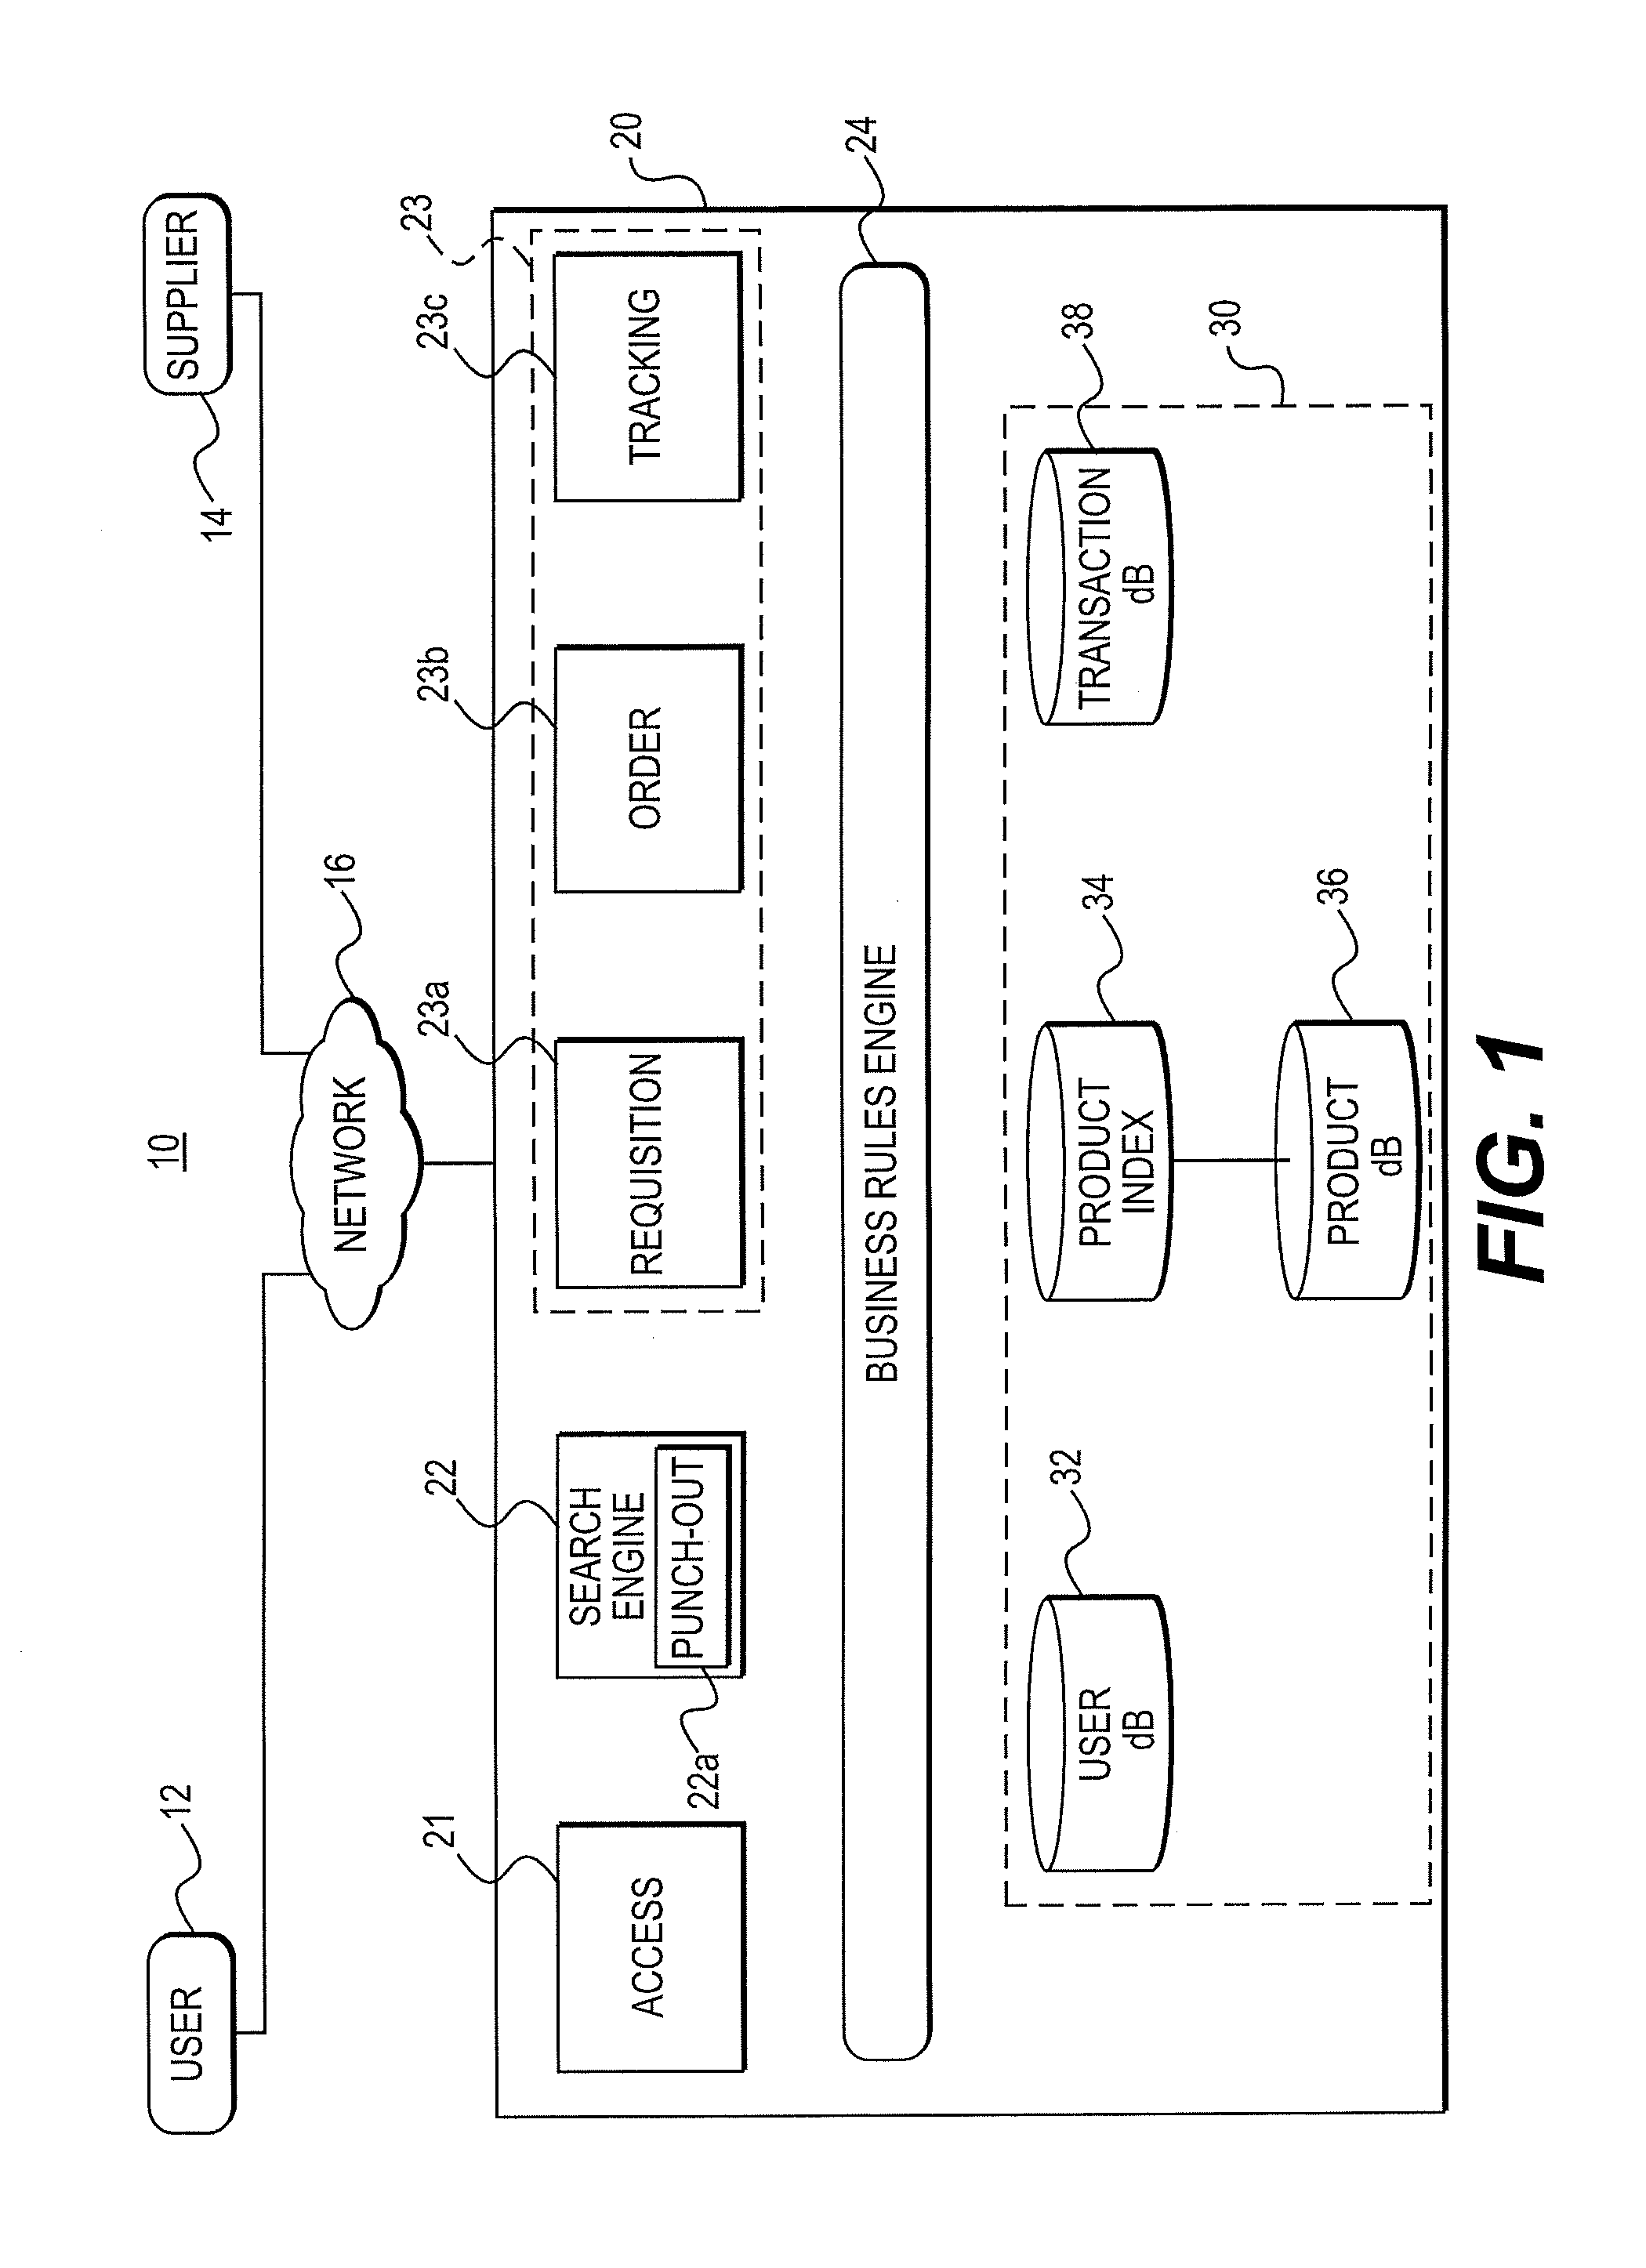 Taxonomy and Data Structure for an Electronic Procurement System